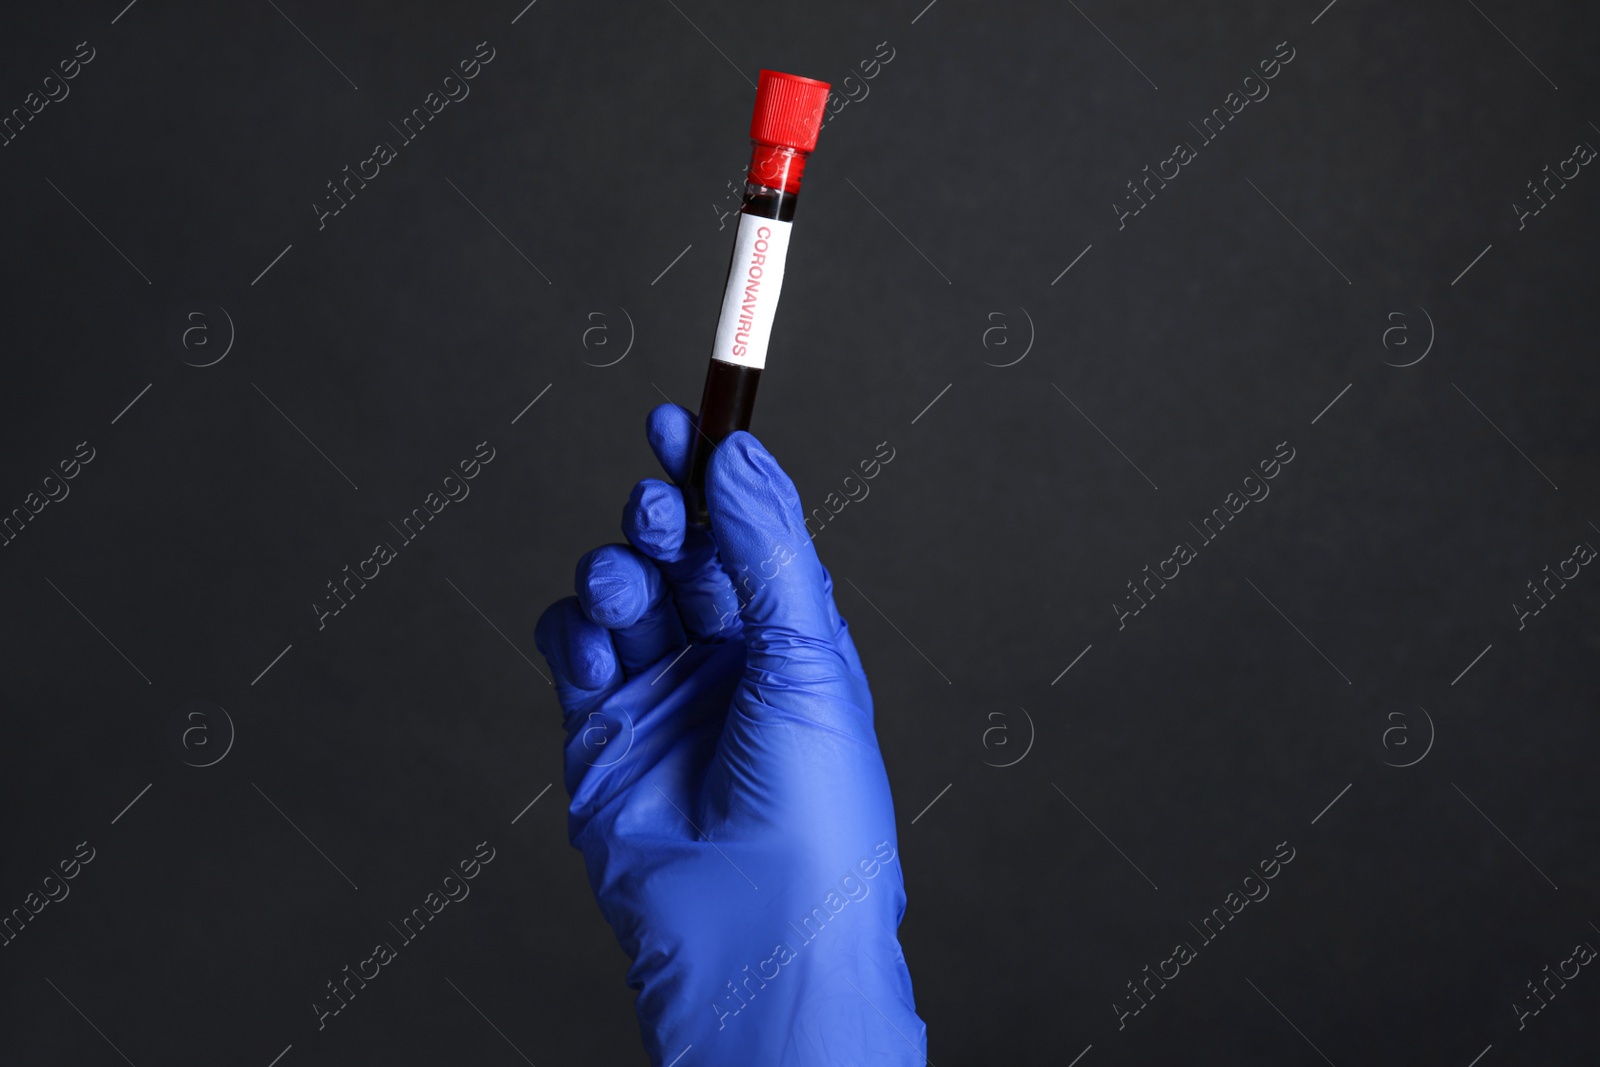 Photo of Scientist holding test tube with blood sample and label CORONA VIRUS on black background, closeup